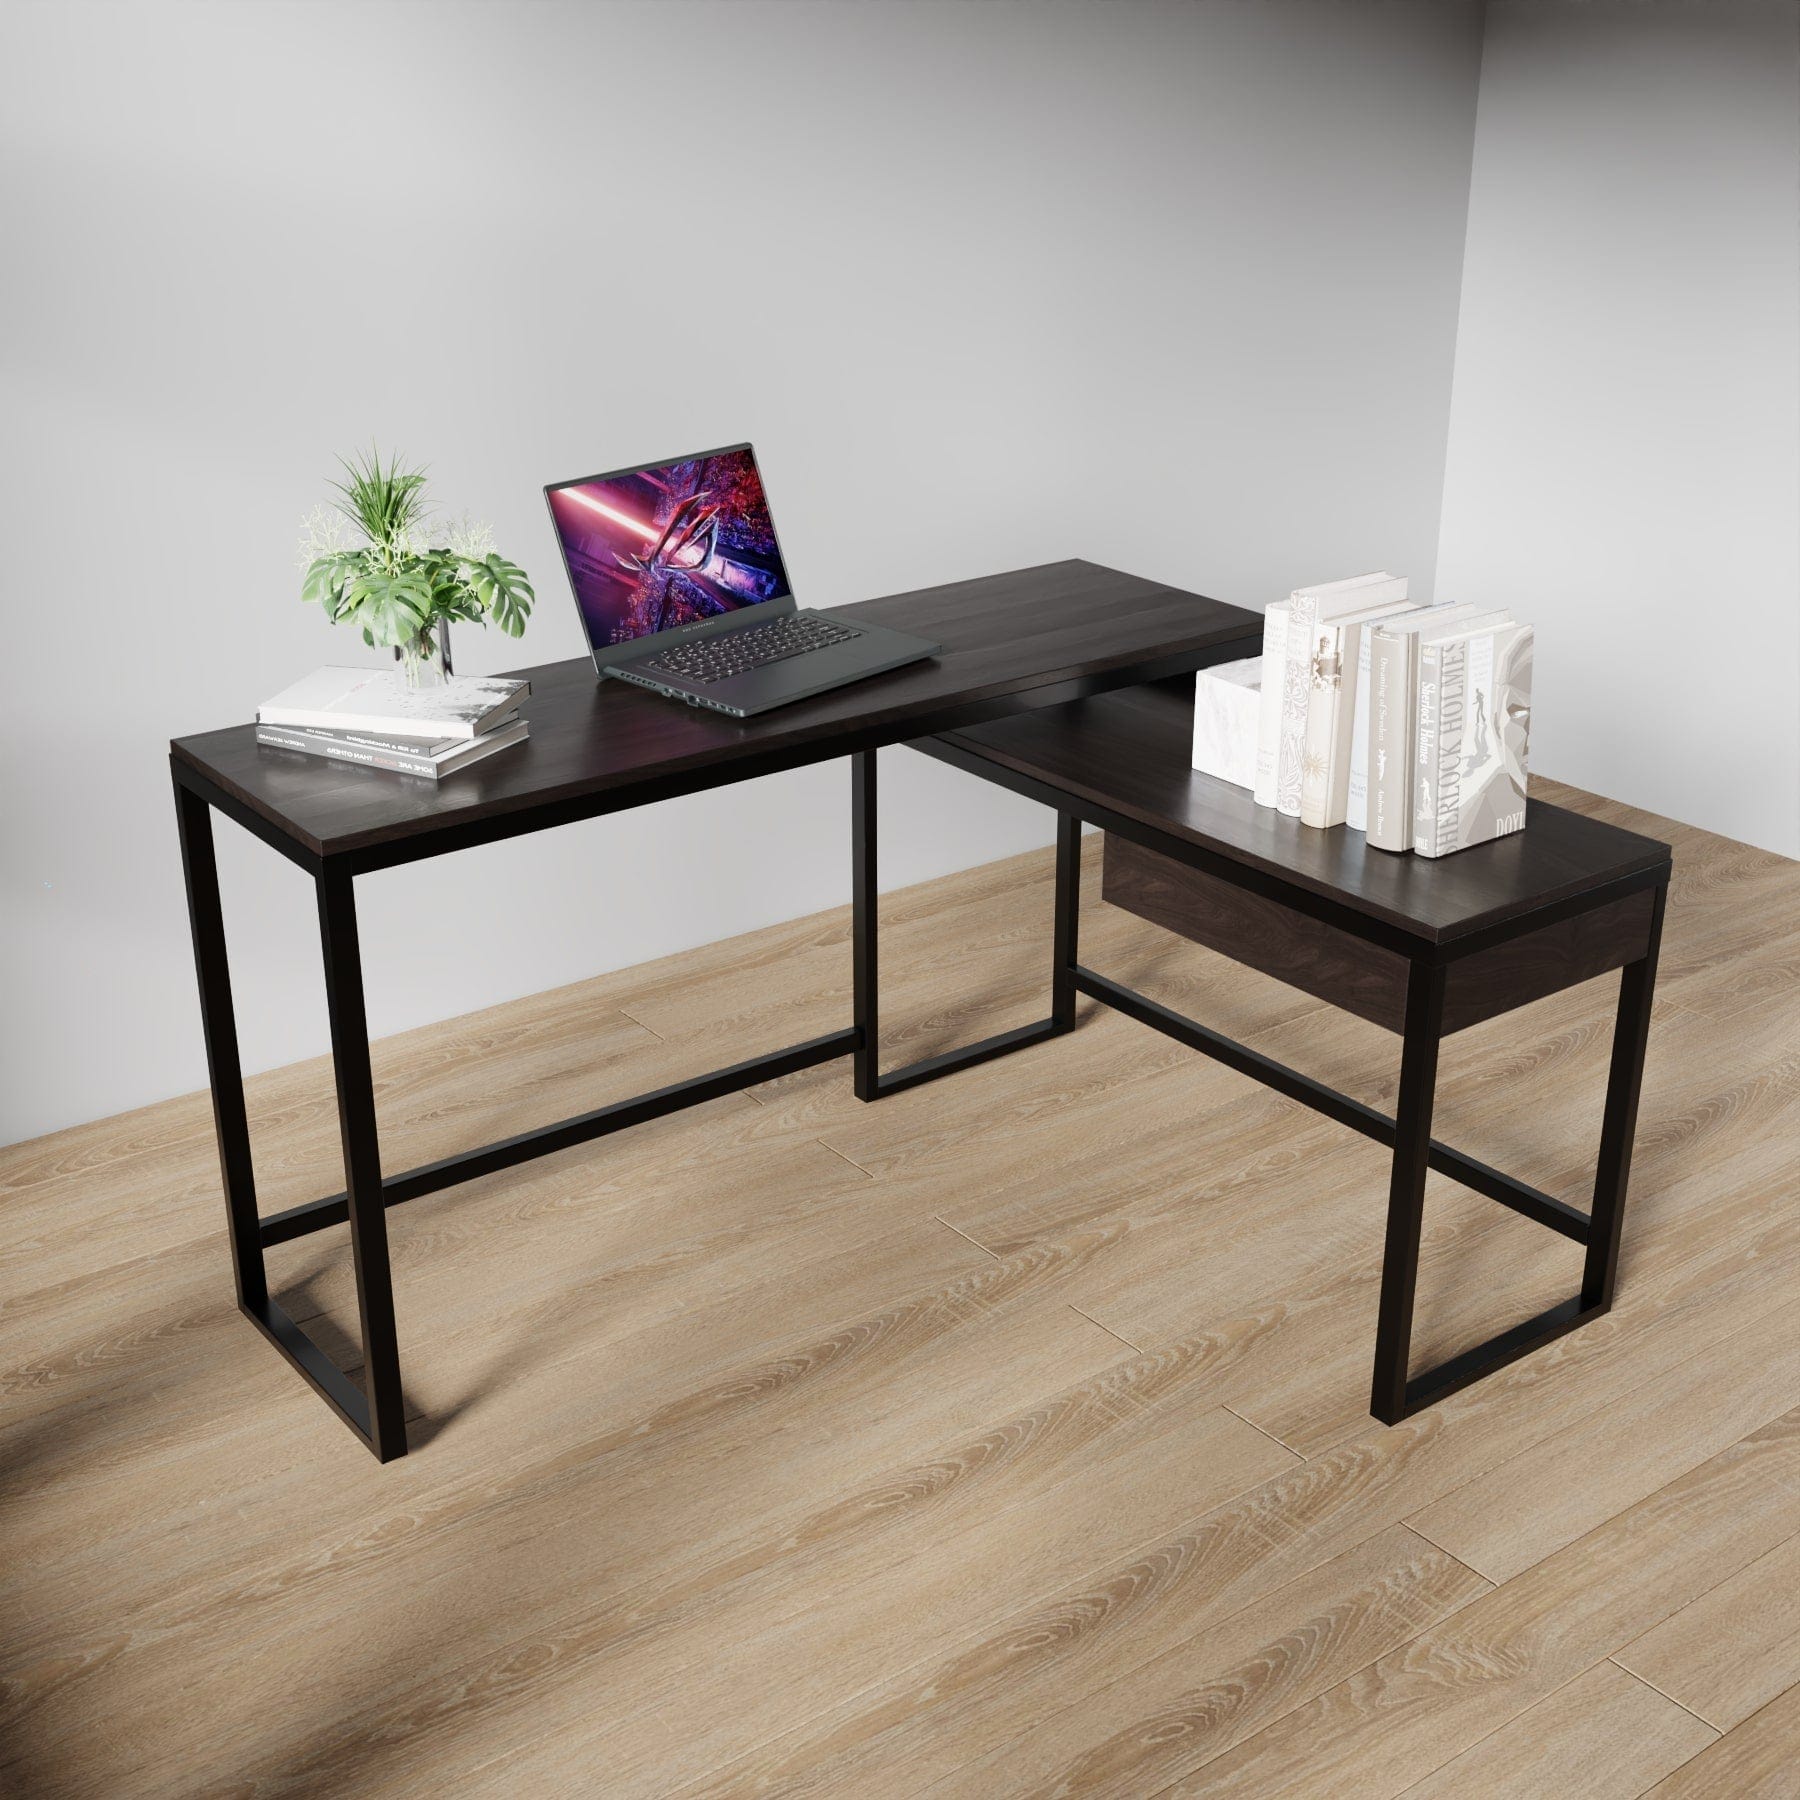 Enkele L Shaped Study Table with Storage Design in Brown Color